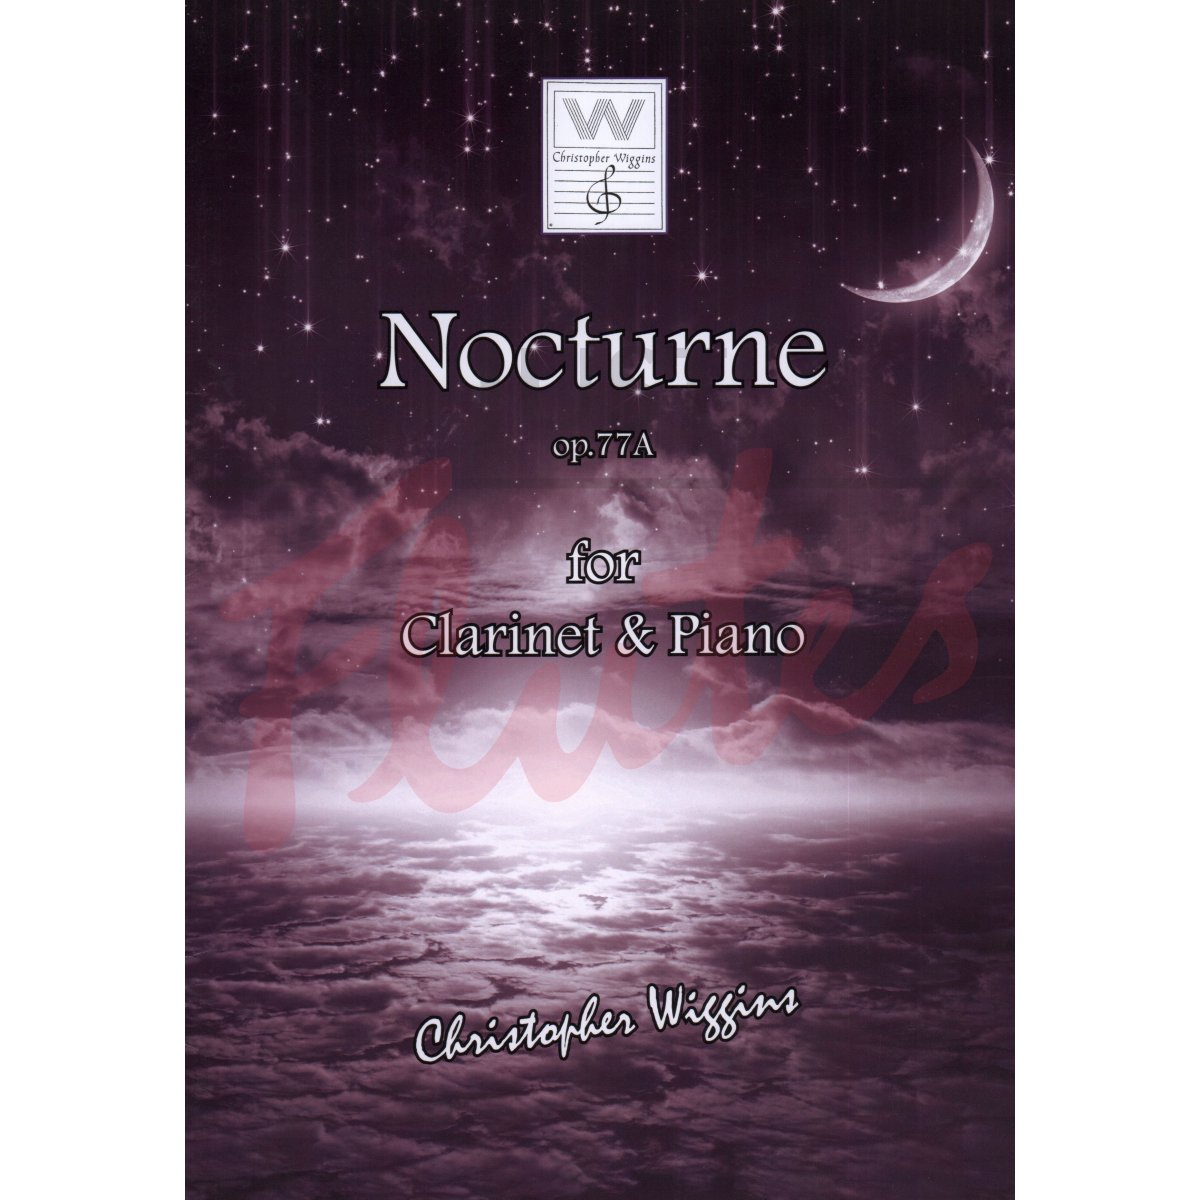 Nocturne for Clarinet and Piano